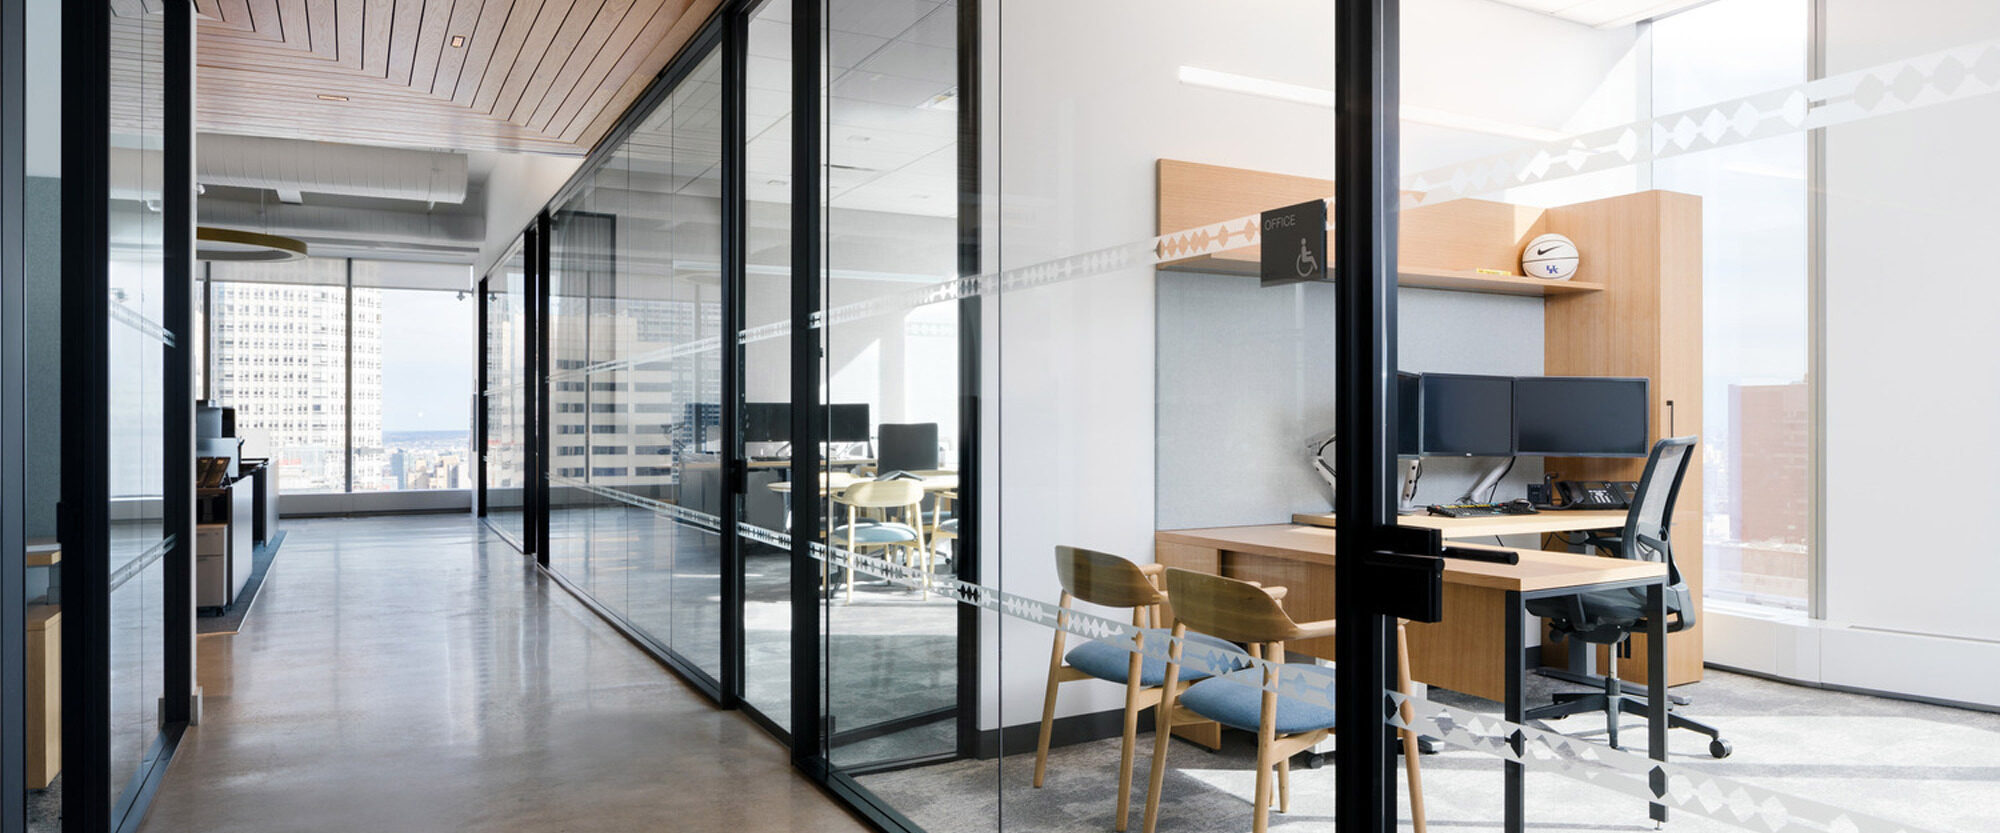 Spacious modern office interior featuring glass partitions, a reflective concrete floor, and a warm wooden slat ceiling that contrasts the cool-tone walls, populated with ergonomic chairs and sleek workstations under natural daylight.